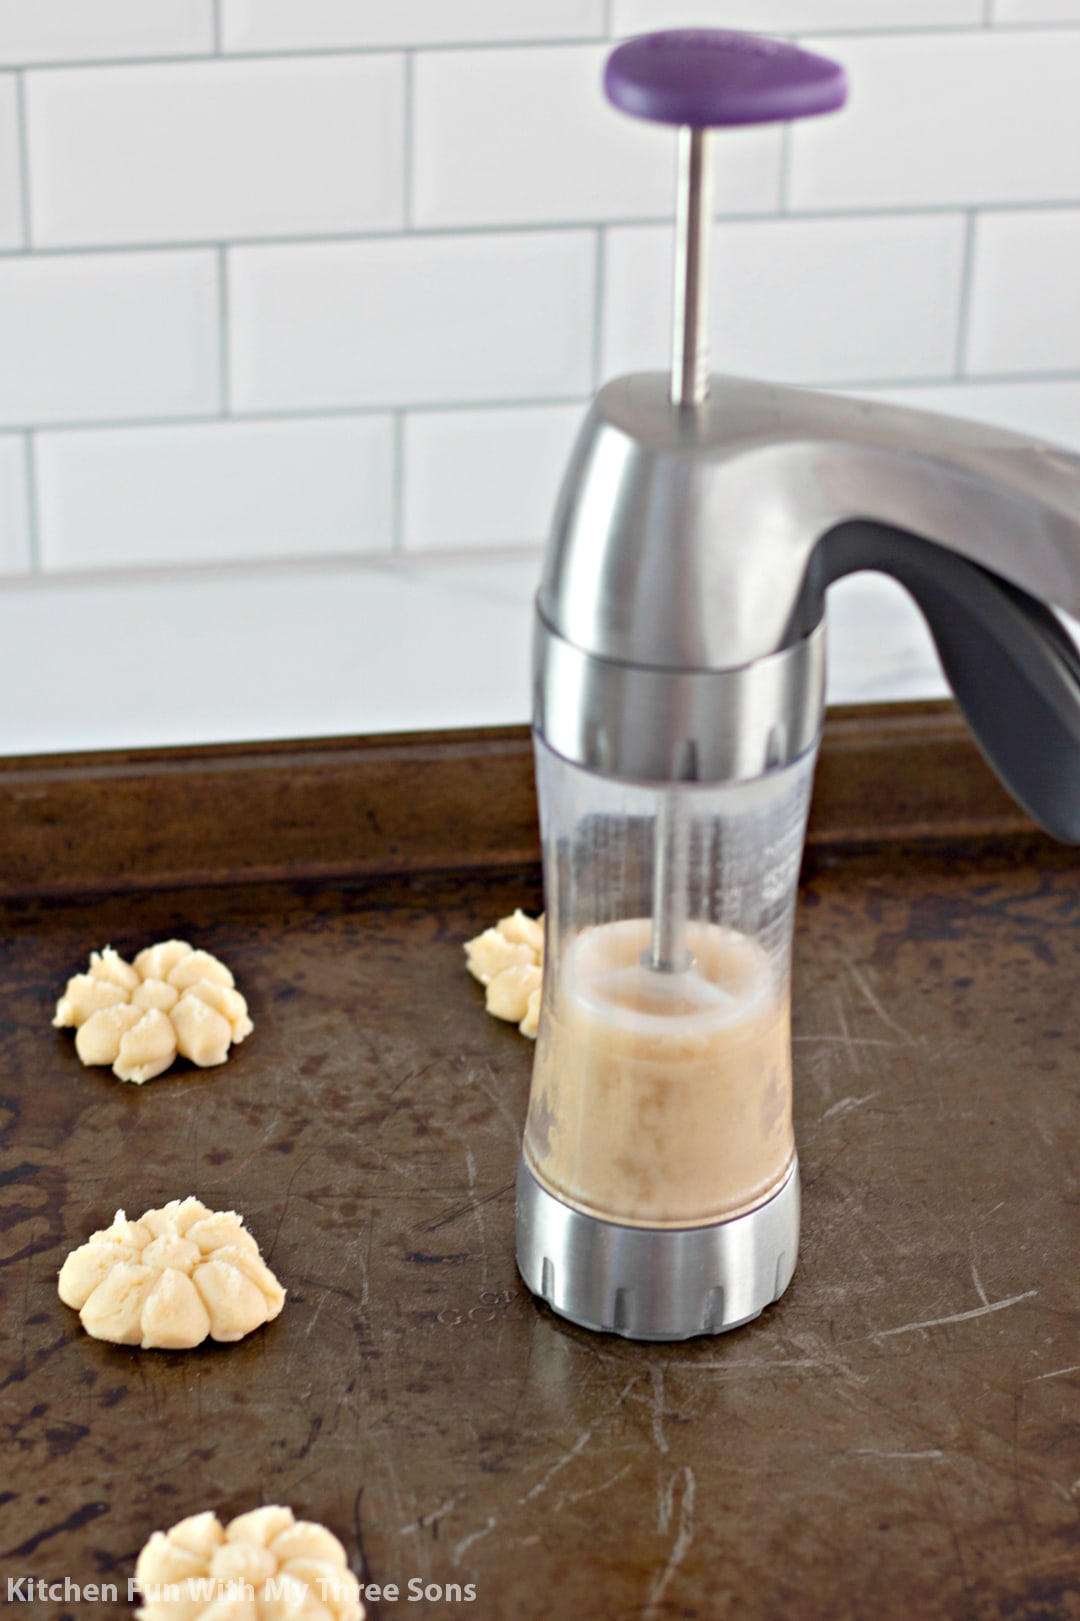 Cookie dough in a cookie press